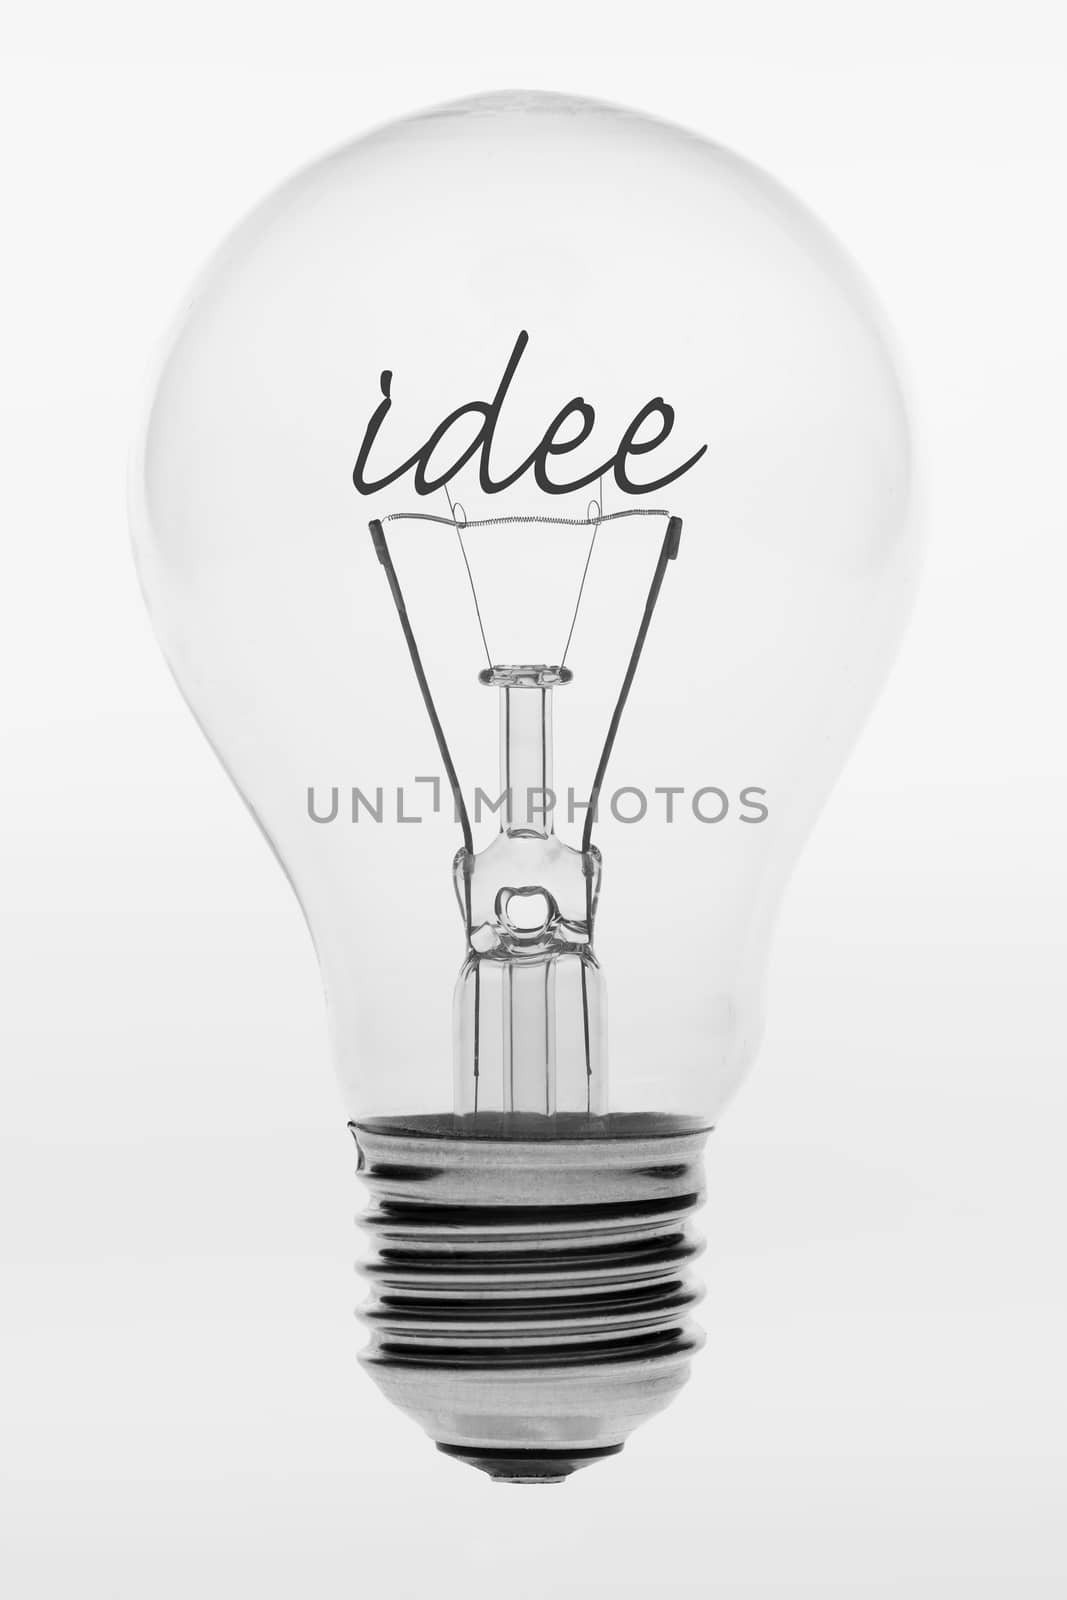 Light bulb with the Dutch text idea
 by Tofotografie